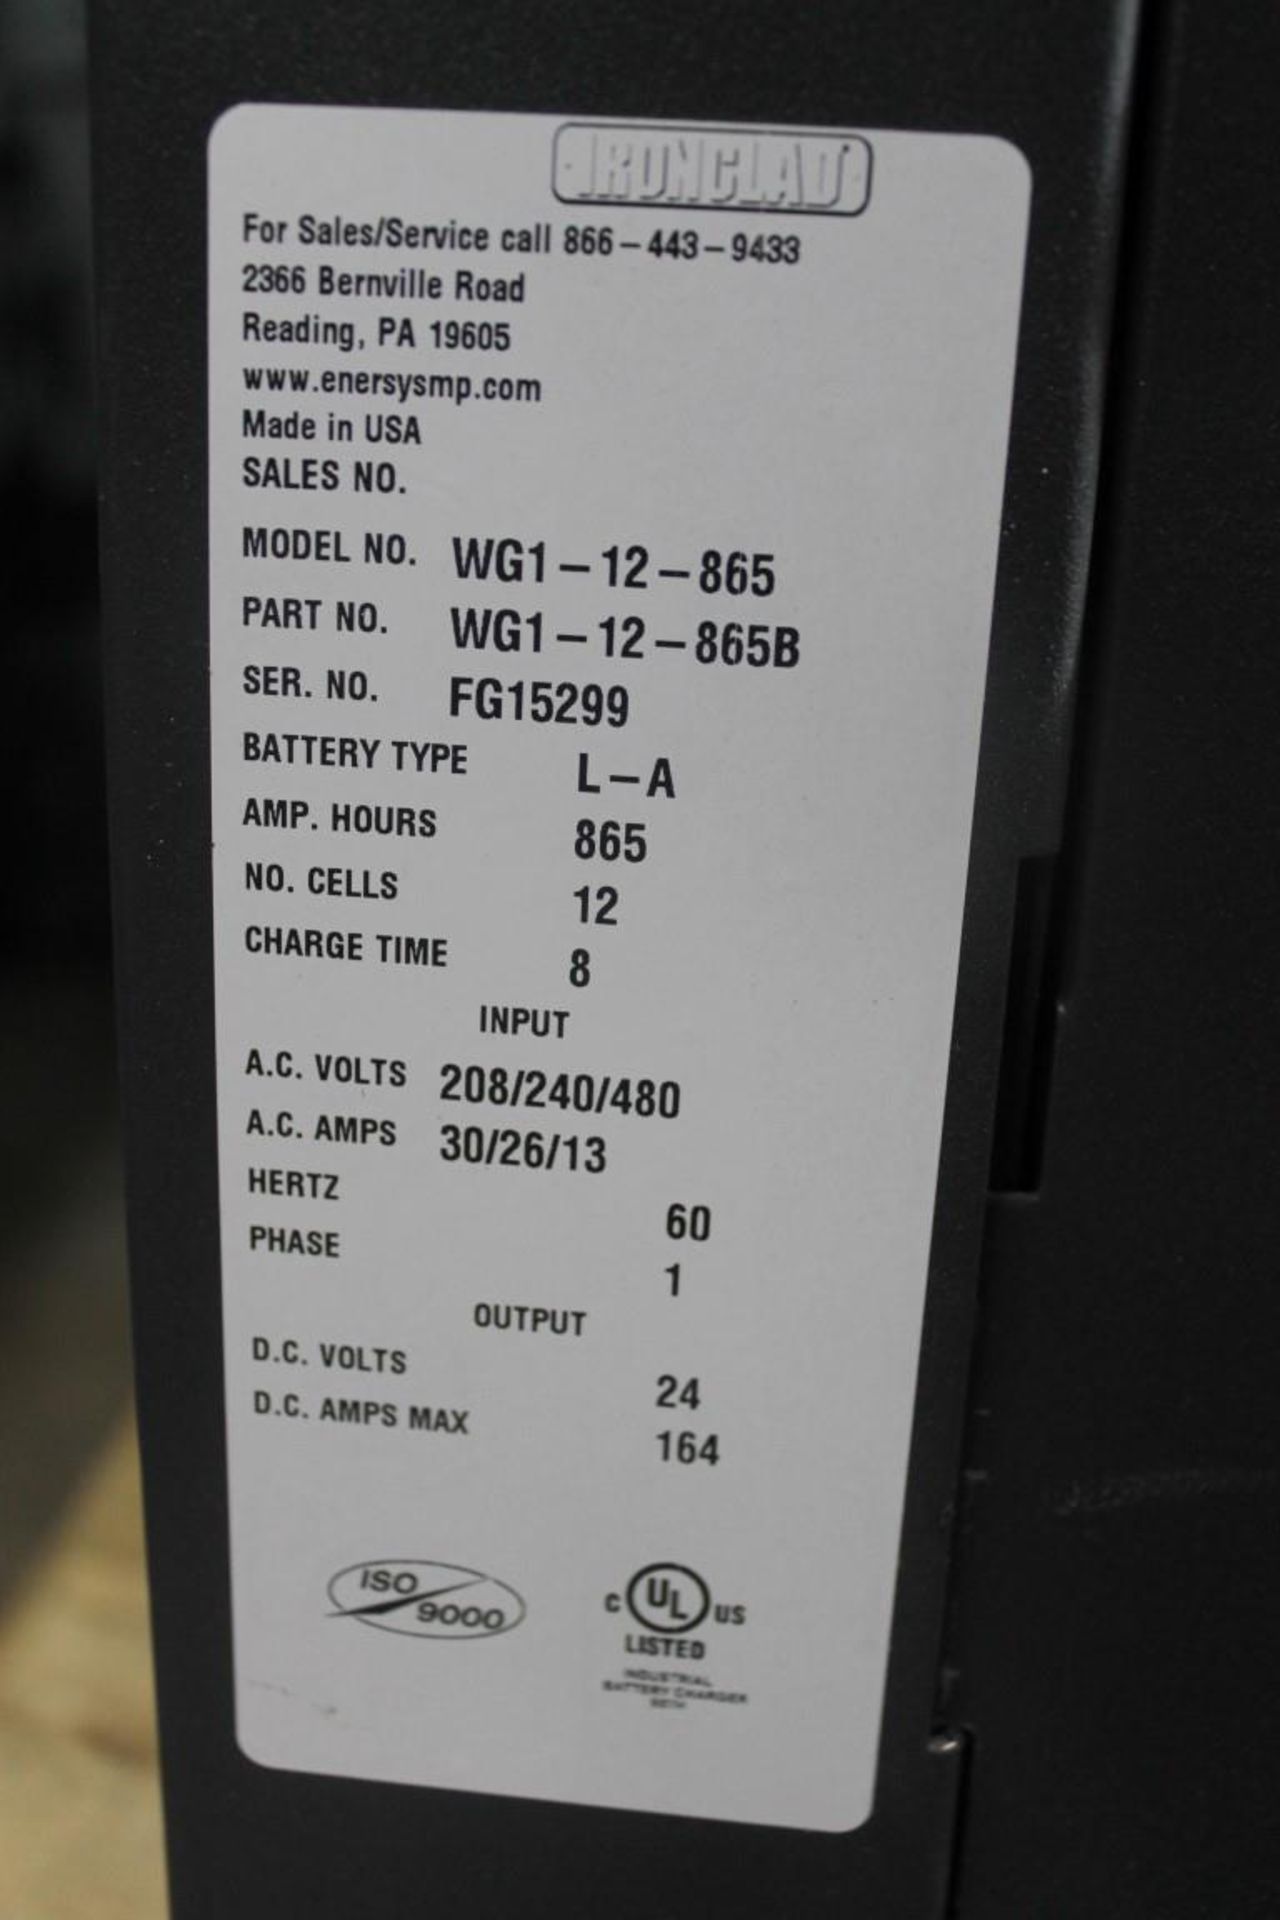 ENERSYS GOLD 24 VOLTS BATTERY CHARGER - Image 3 of 3